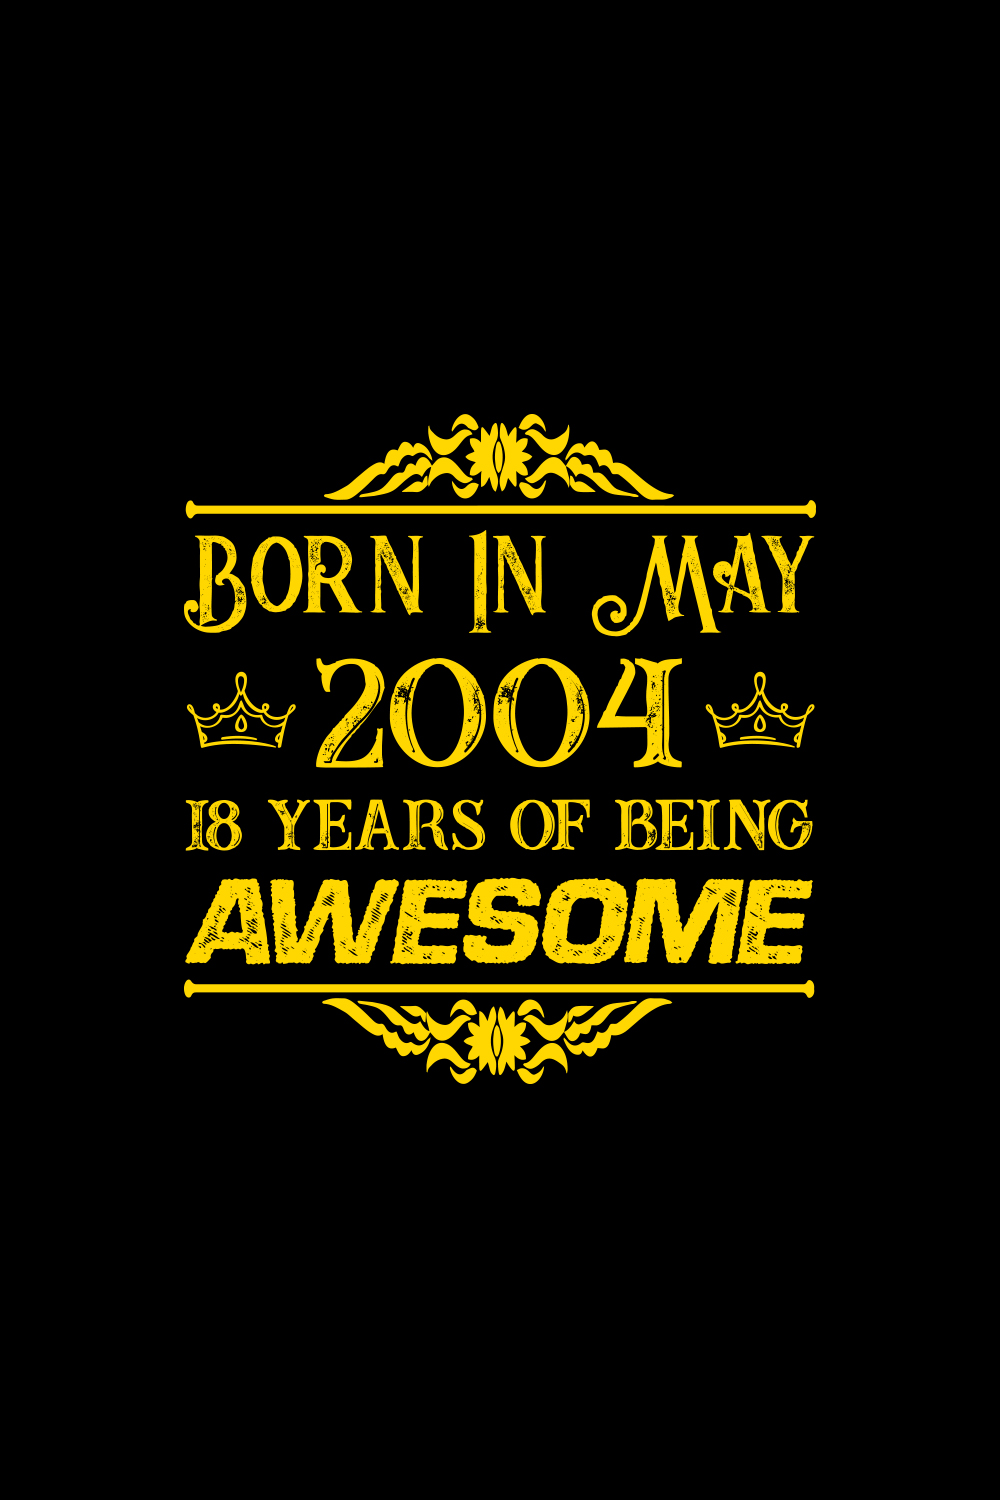 Born in may 2004-18 years of being awesome pinterest preview image.